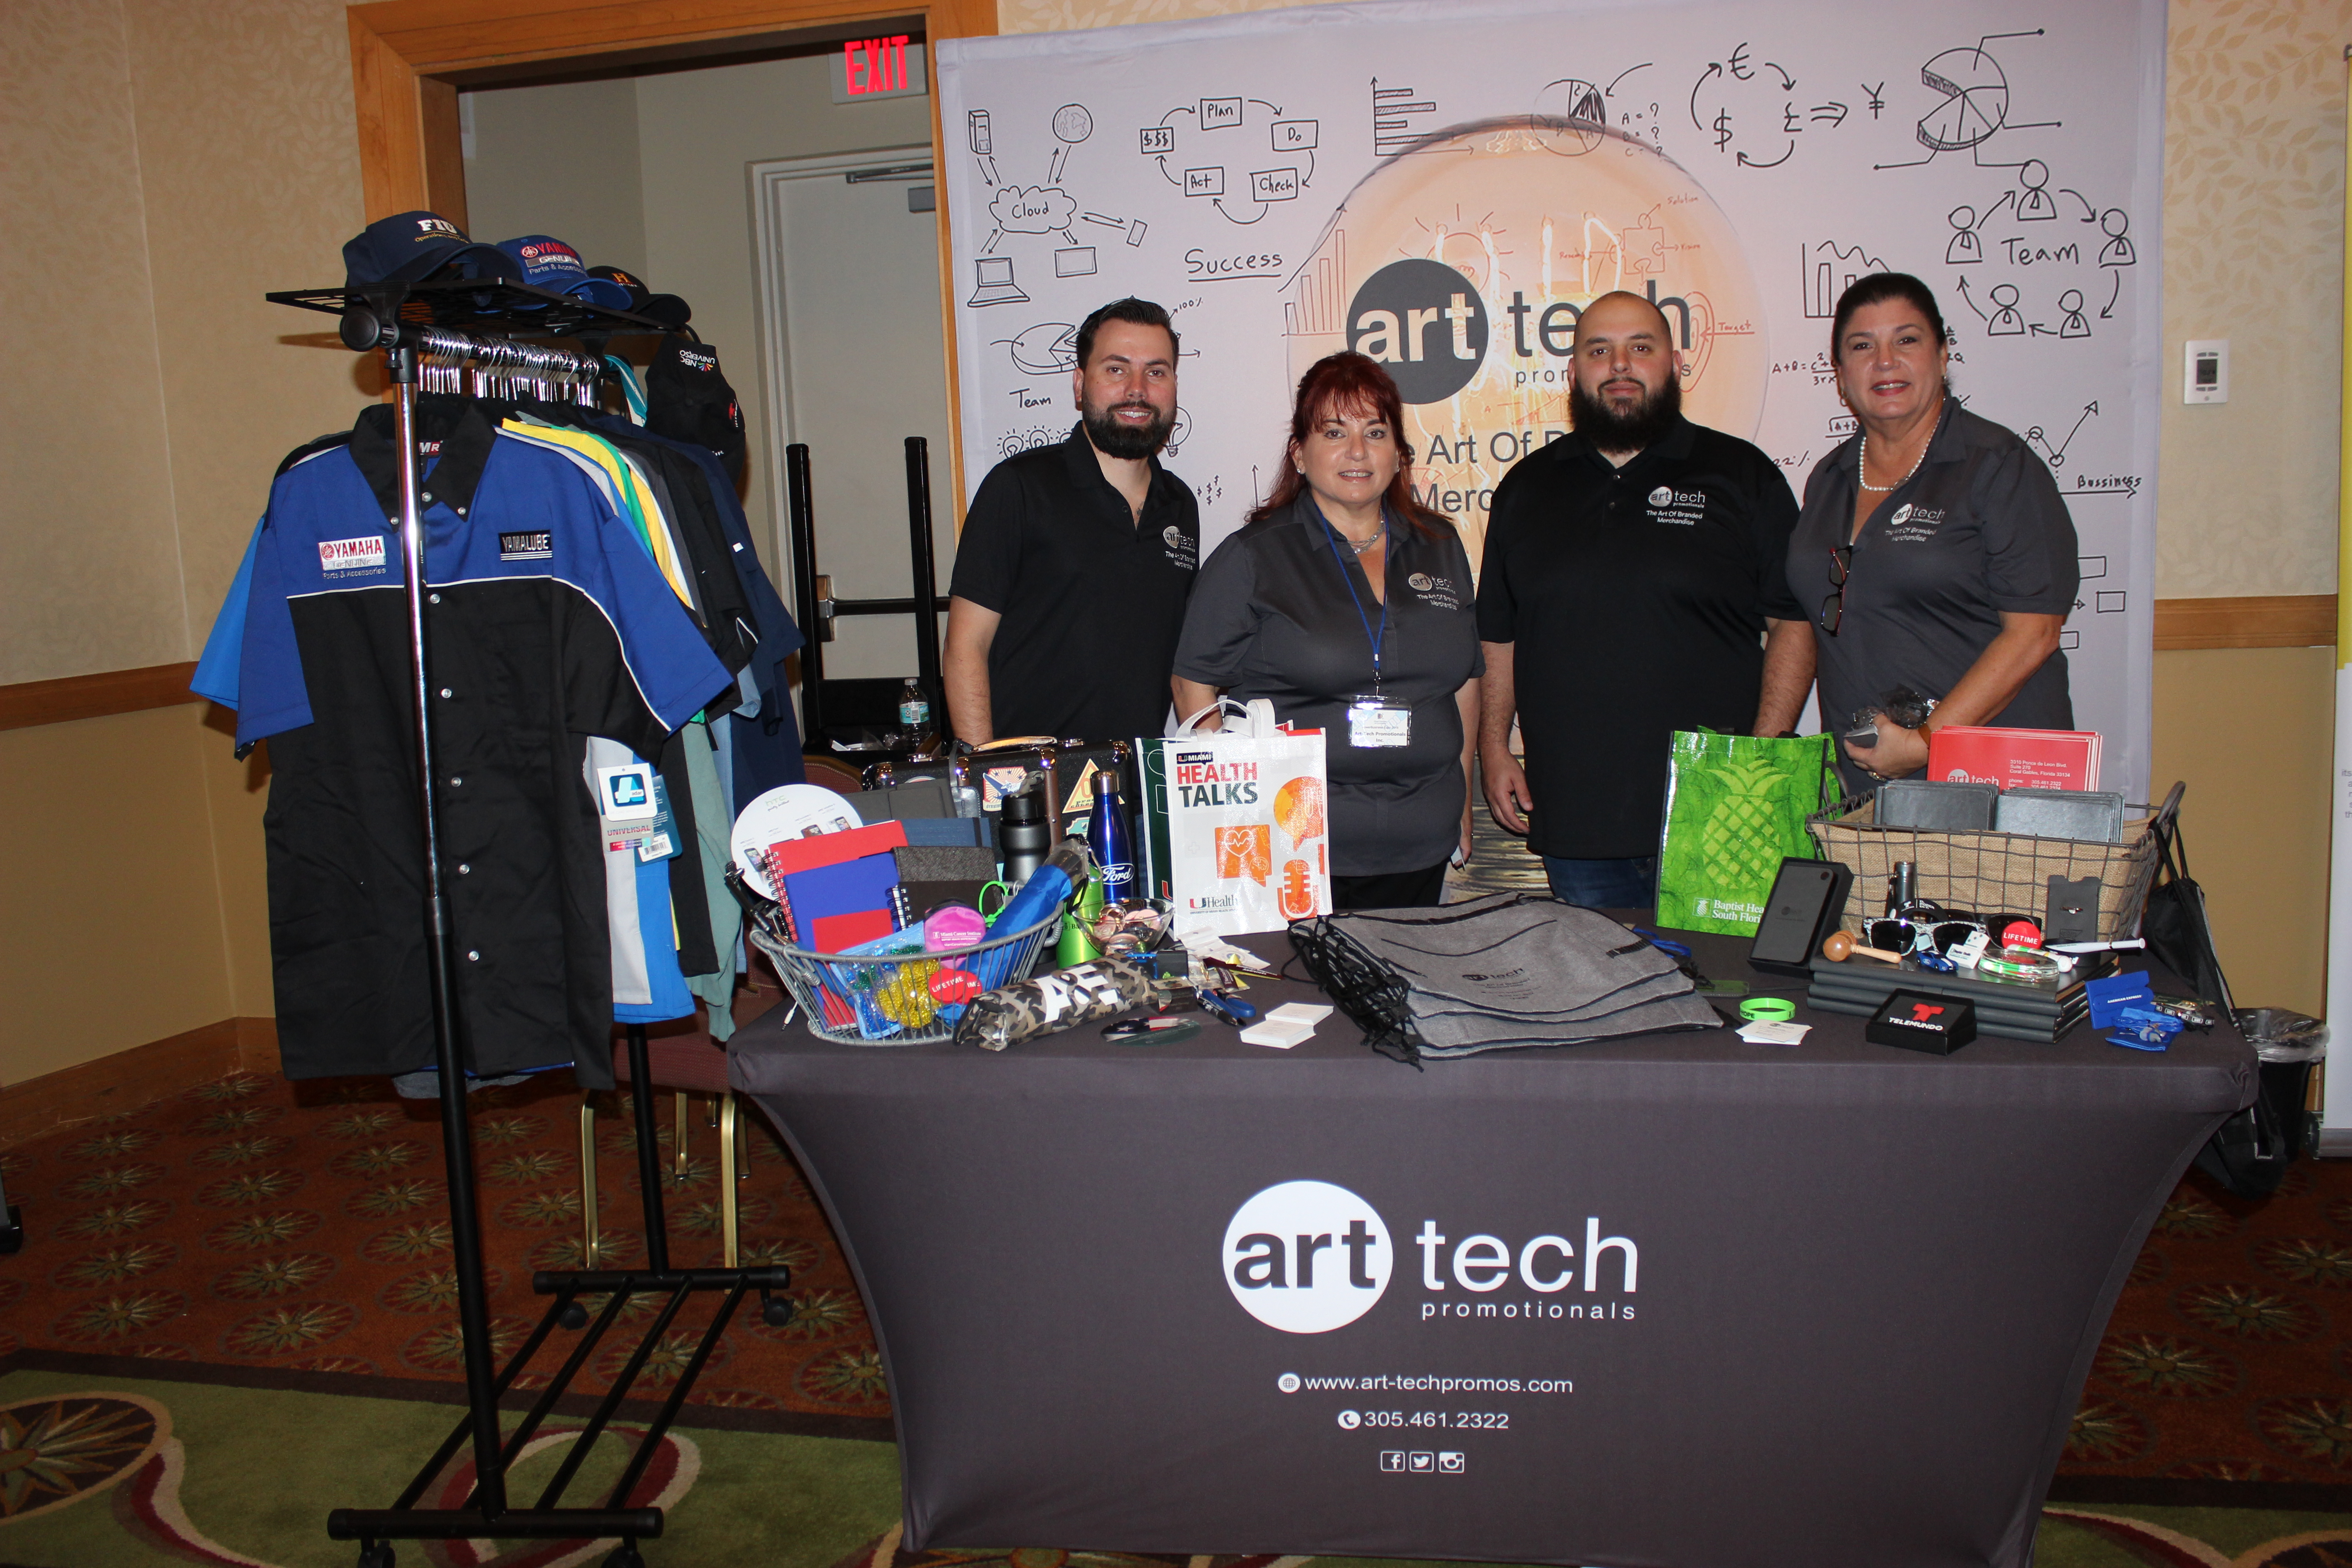 Art Tech Promotionals representing business in ExpoMiami 2018 hosted by the Doral Chamber of Commerce.